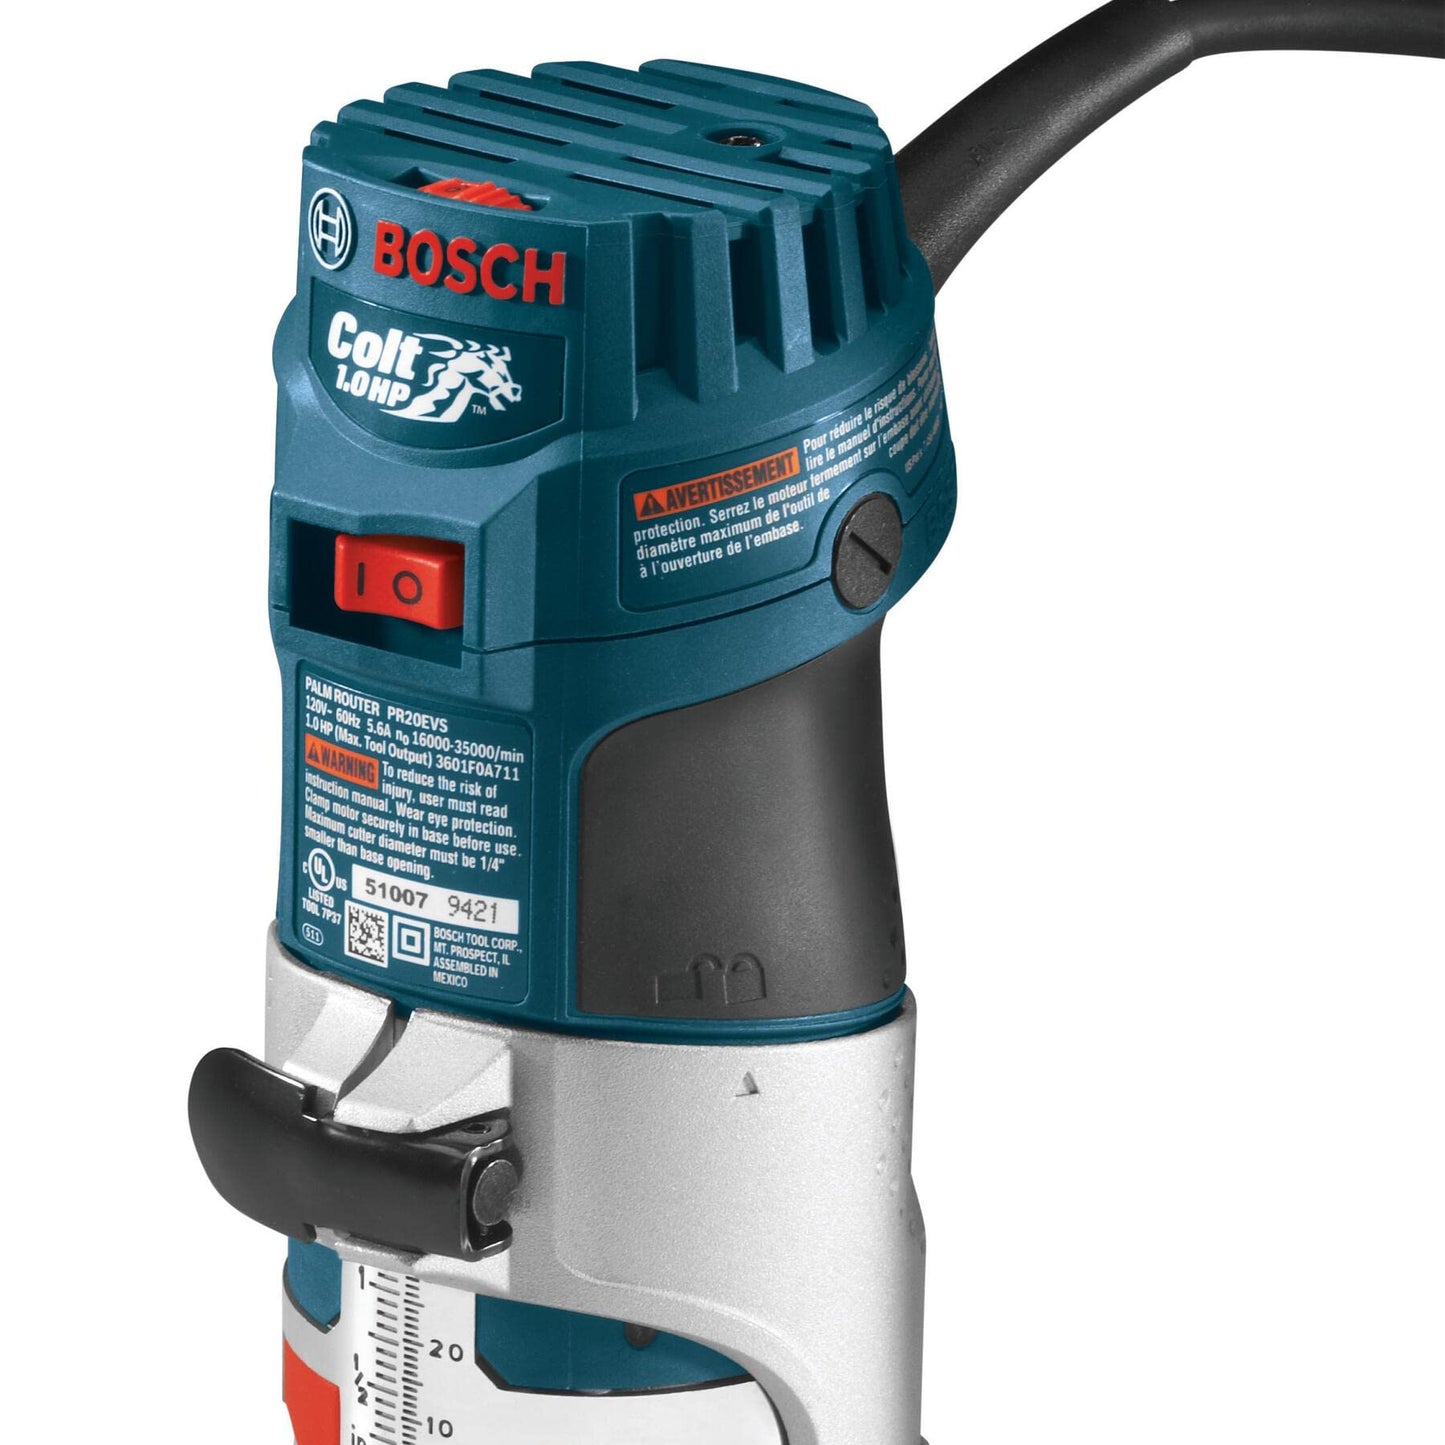 BOSCH PR20EVS Router Tool, Colt 1-Horsepower 5.6 Amp Electronic Variable-Speed Palm Router